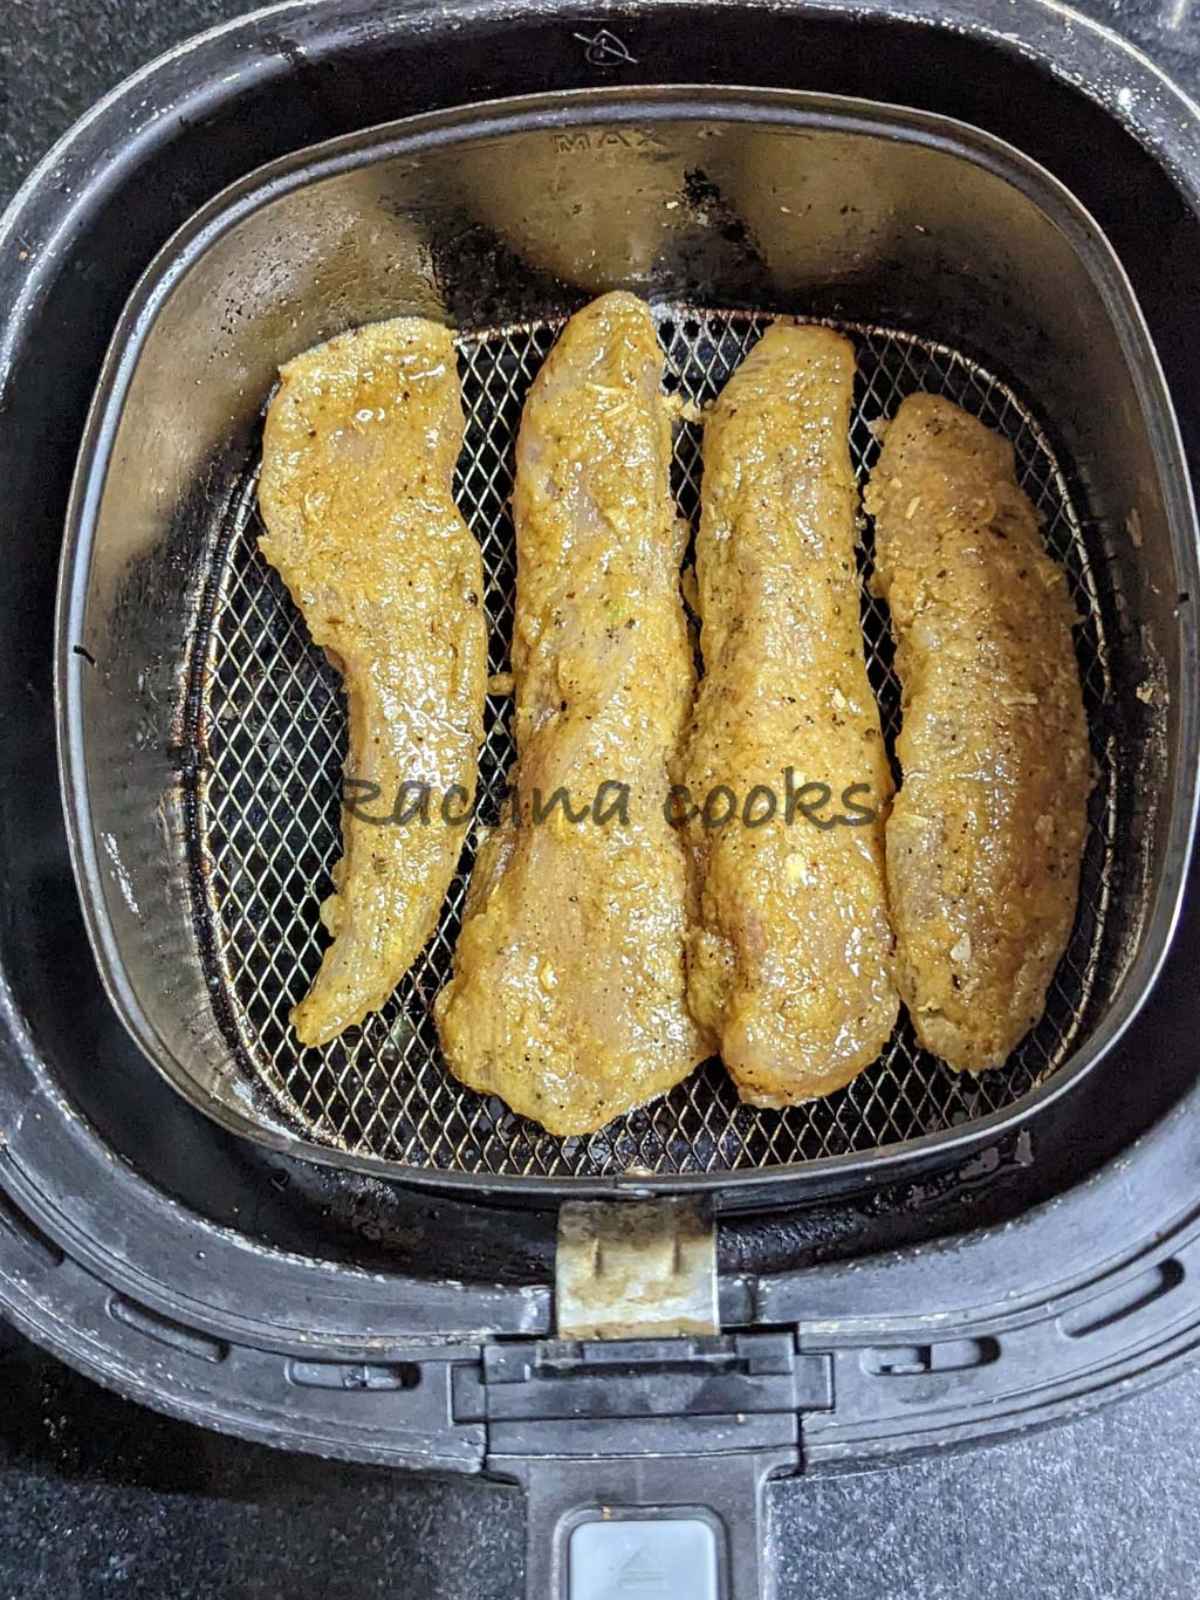 4 breaded chicken tenders in air fryer basket after spraying with olive oil